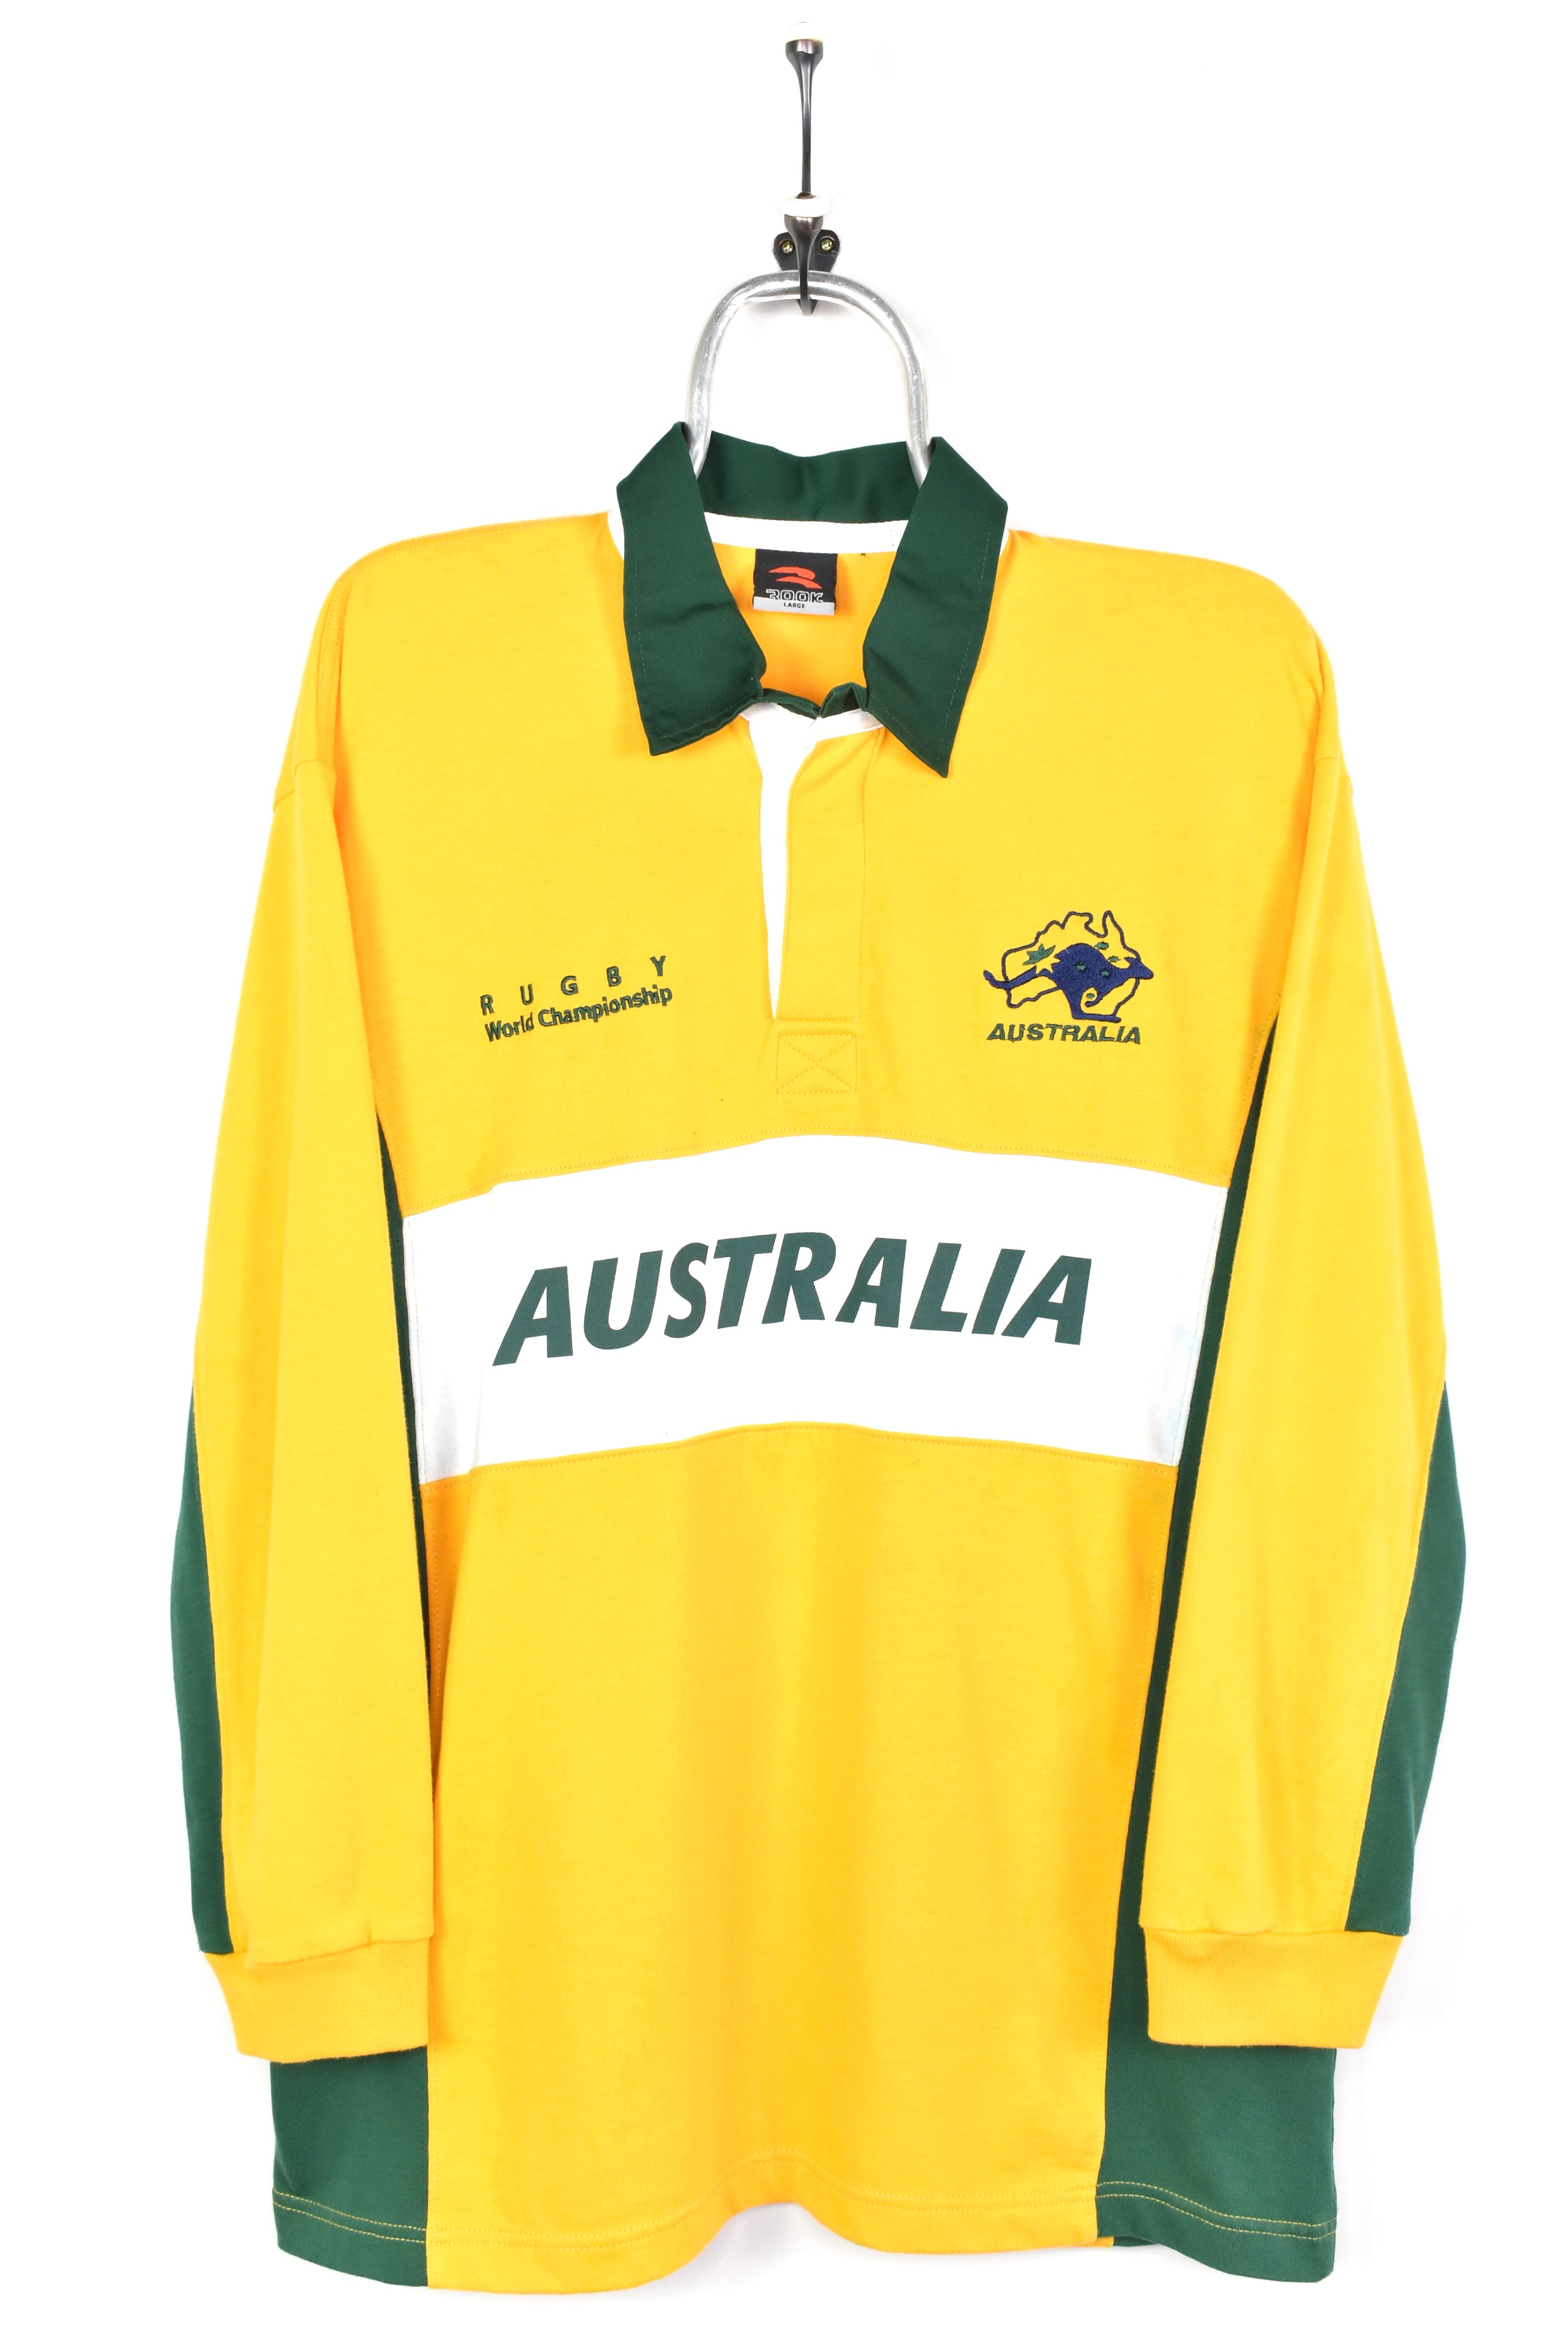 AUSTRALIAN RUGBY EMBROIDERED POLO SWEATSHIRT | LARGE PRO SPORT